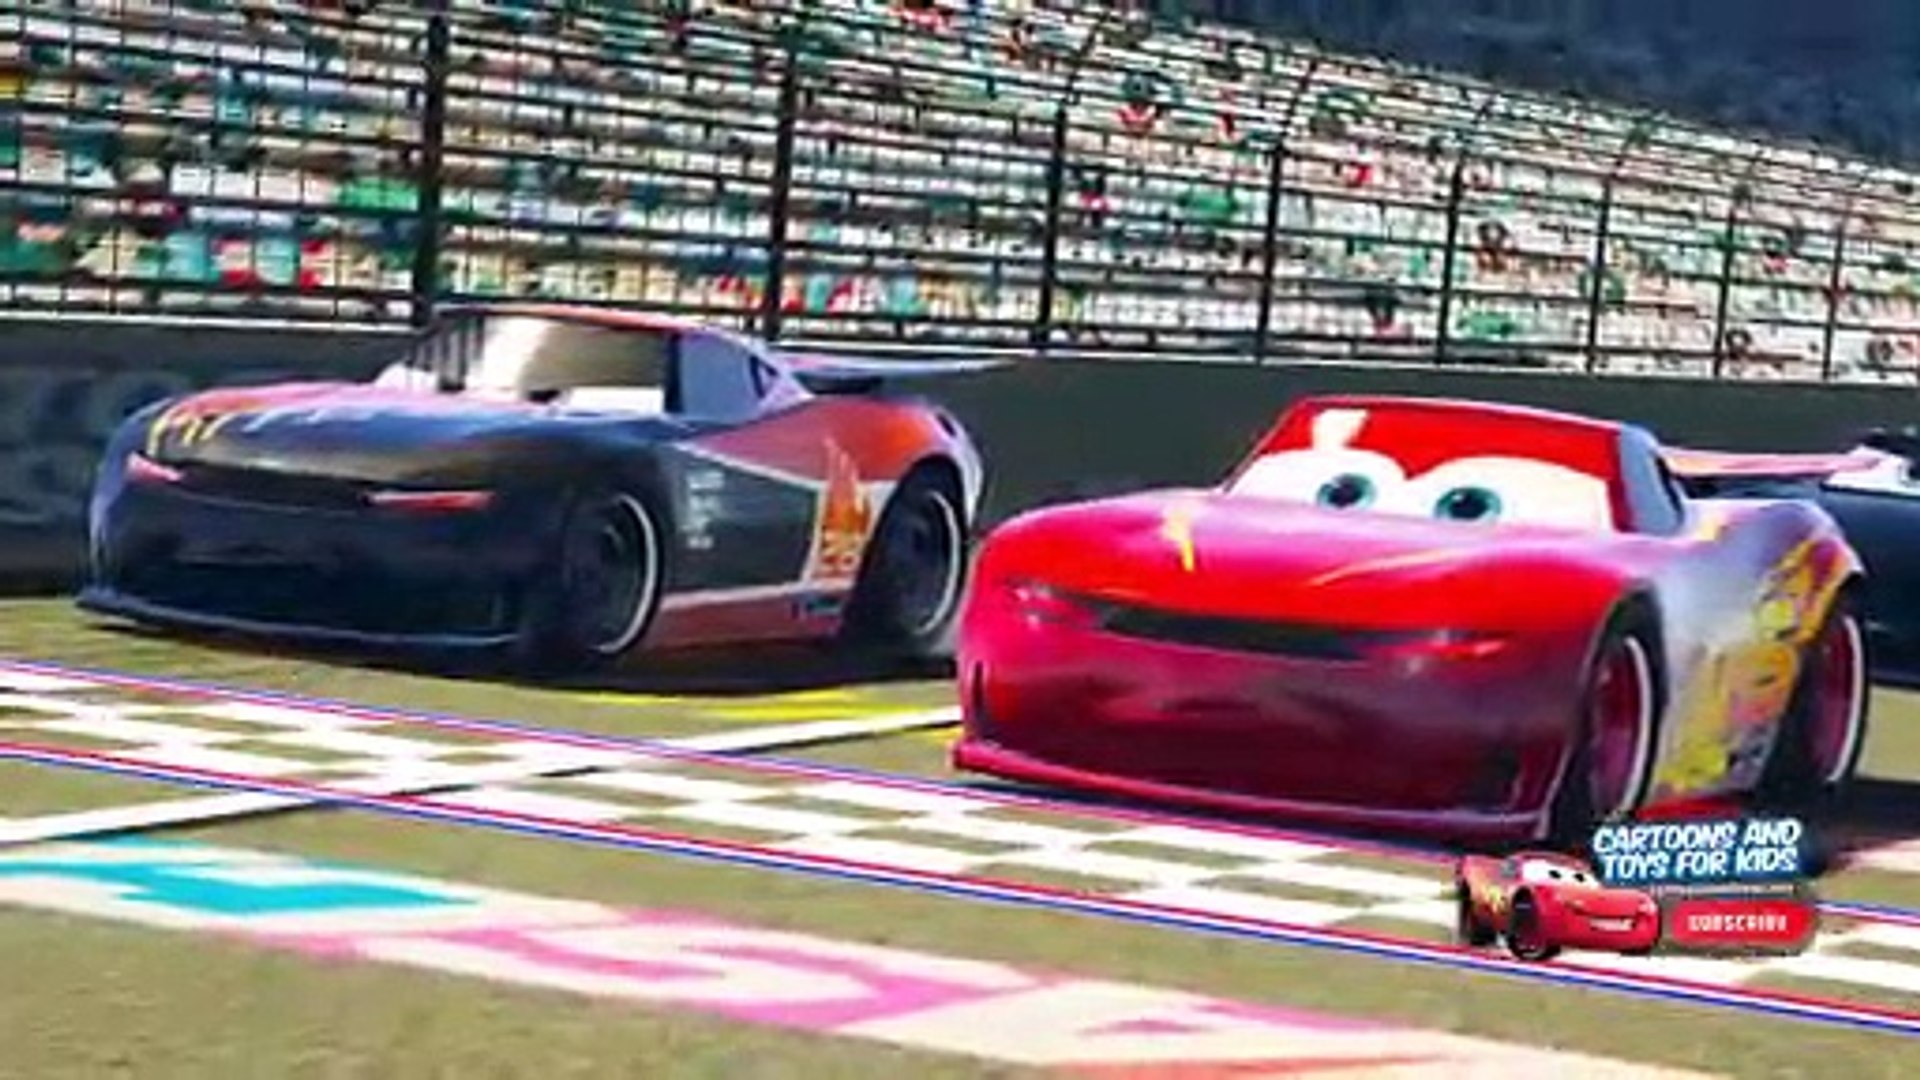 cars 3 toys video